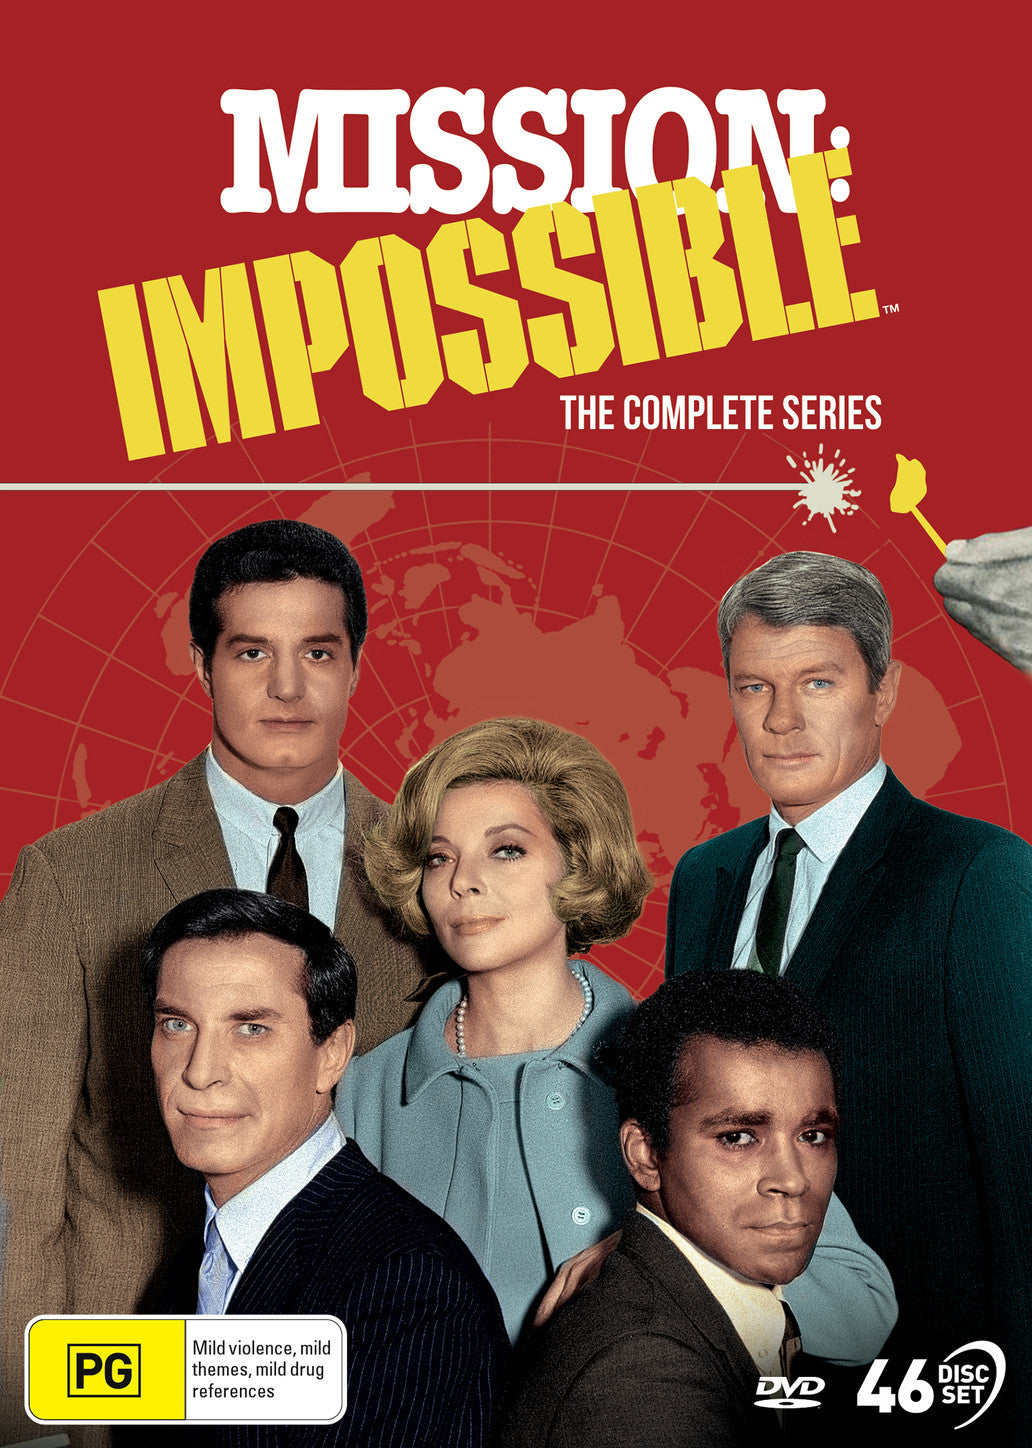 MISSION: IMPOSSIBLE: THE COMPLETE SERIES (1966 - 73) – Madman